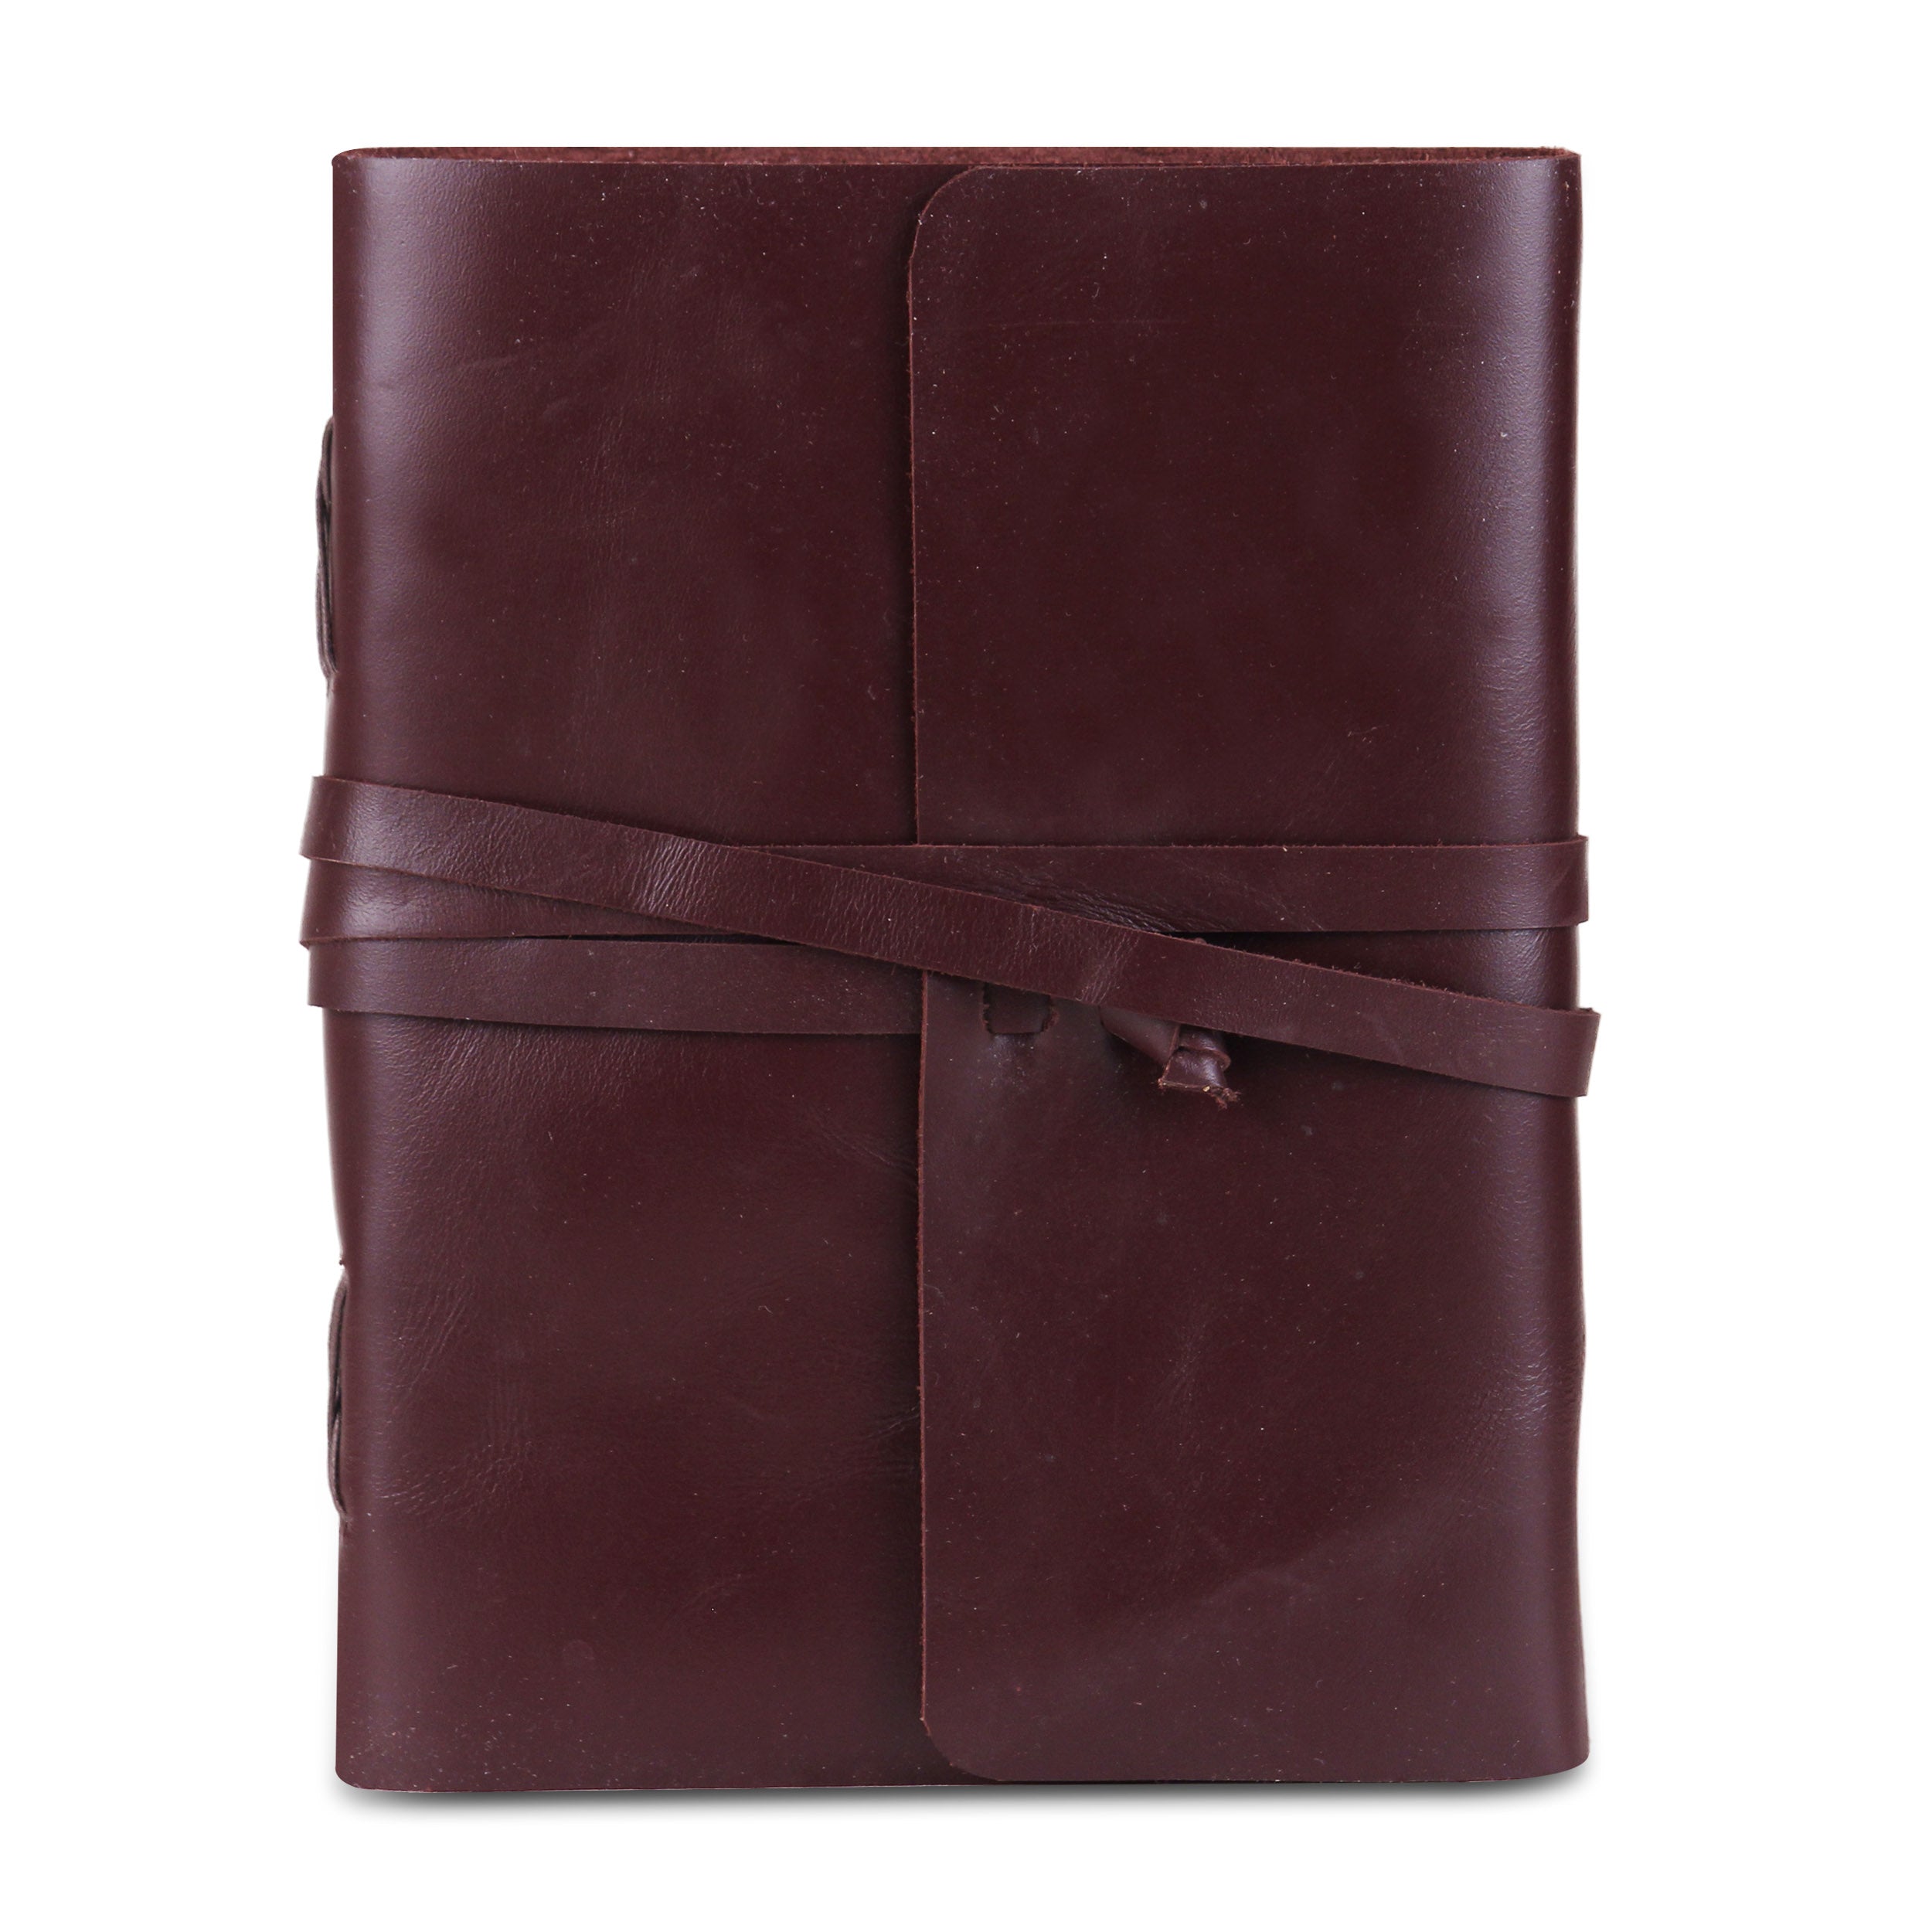 Genuine Full Grain Brown Leather Handmade Journal Notebook with Wrap Around Strap Enclosure